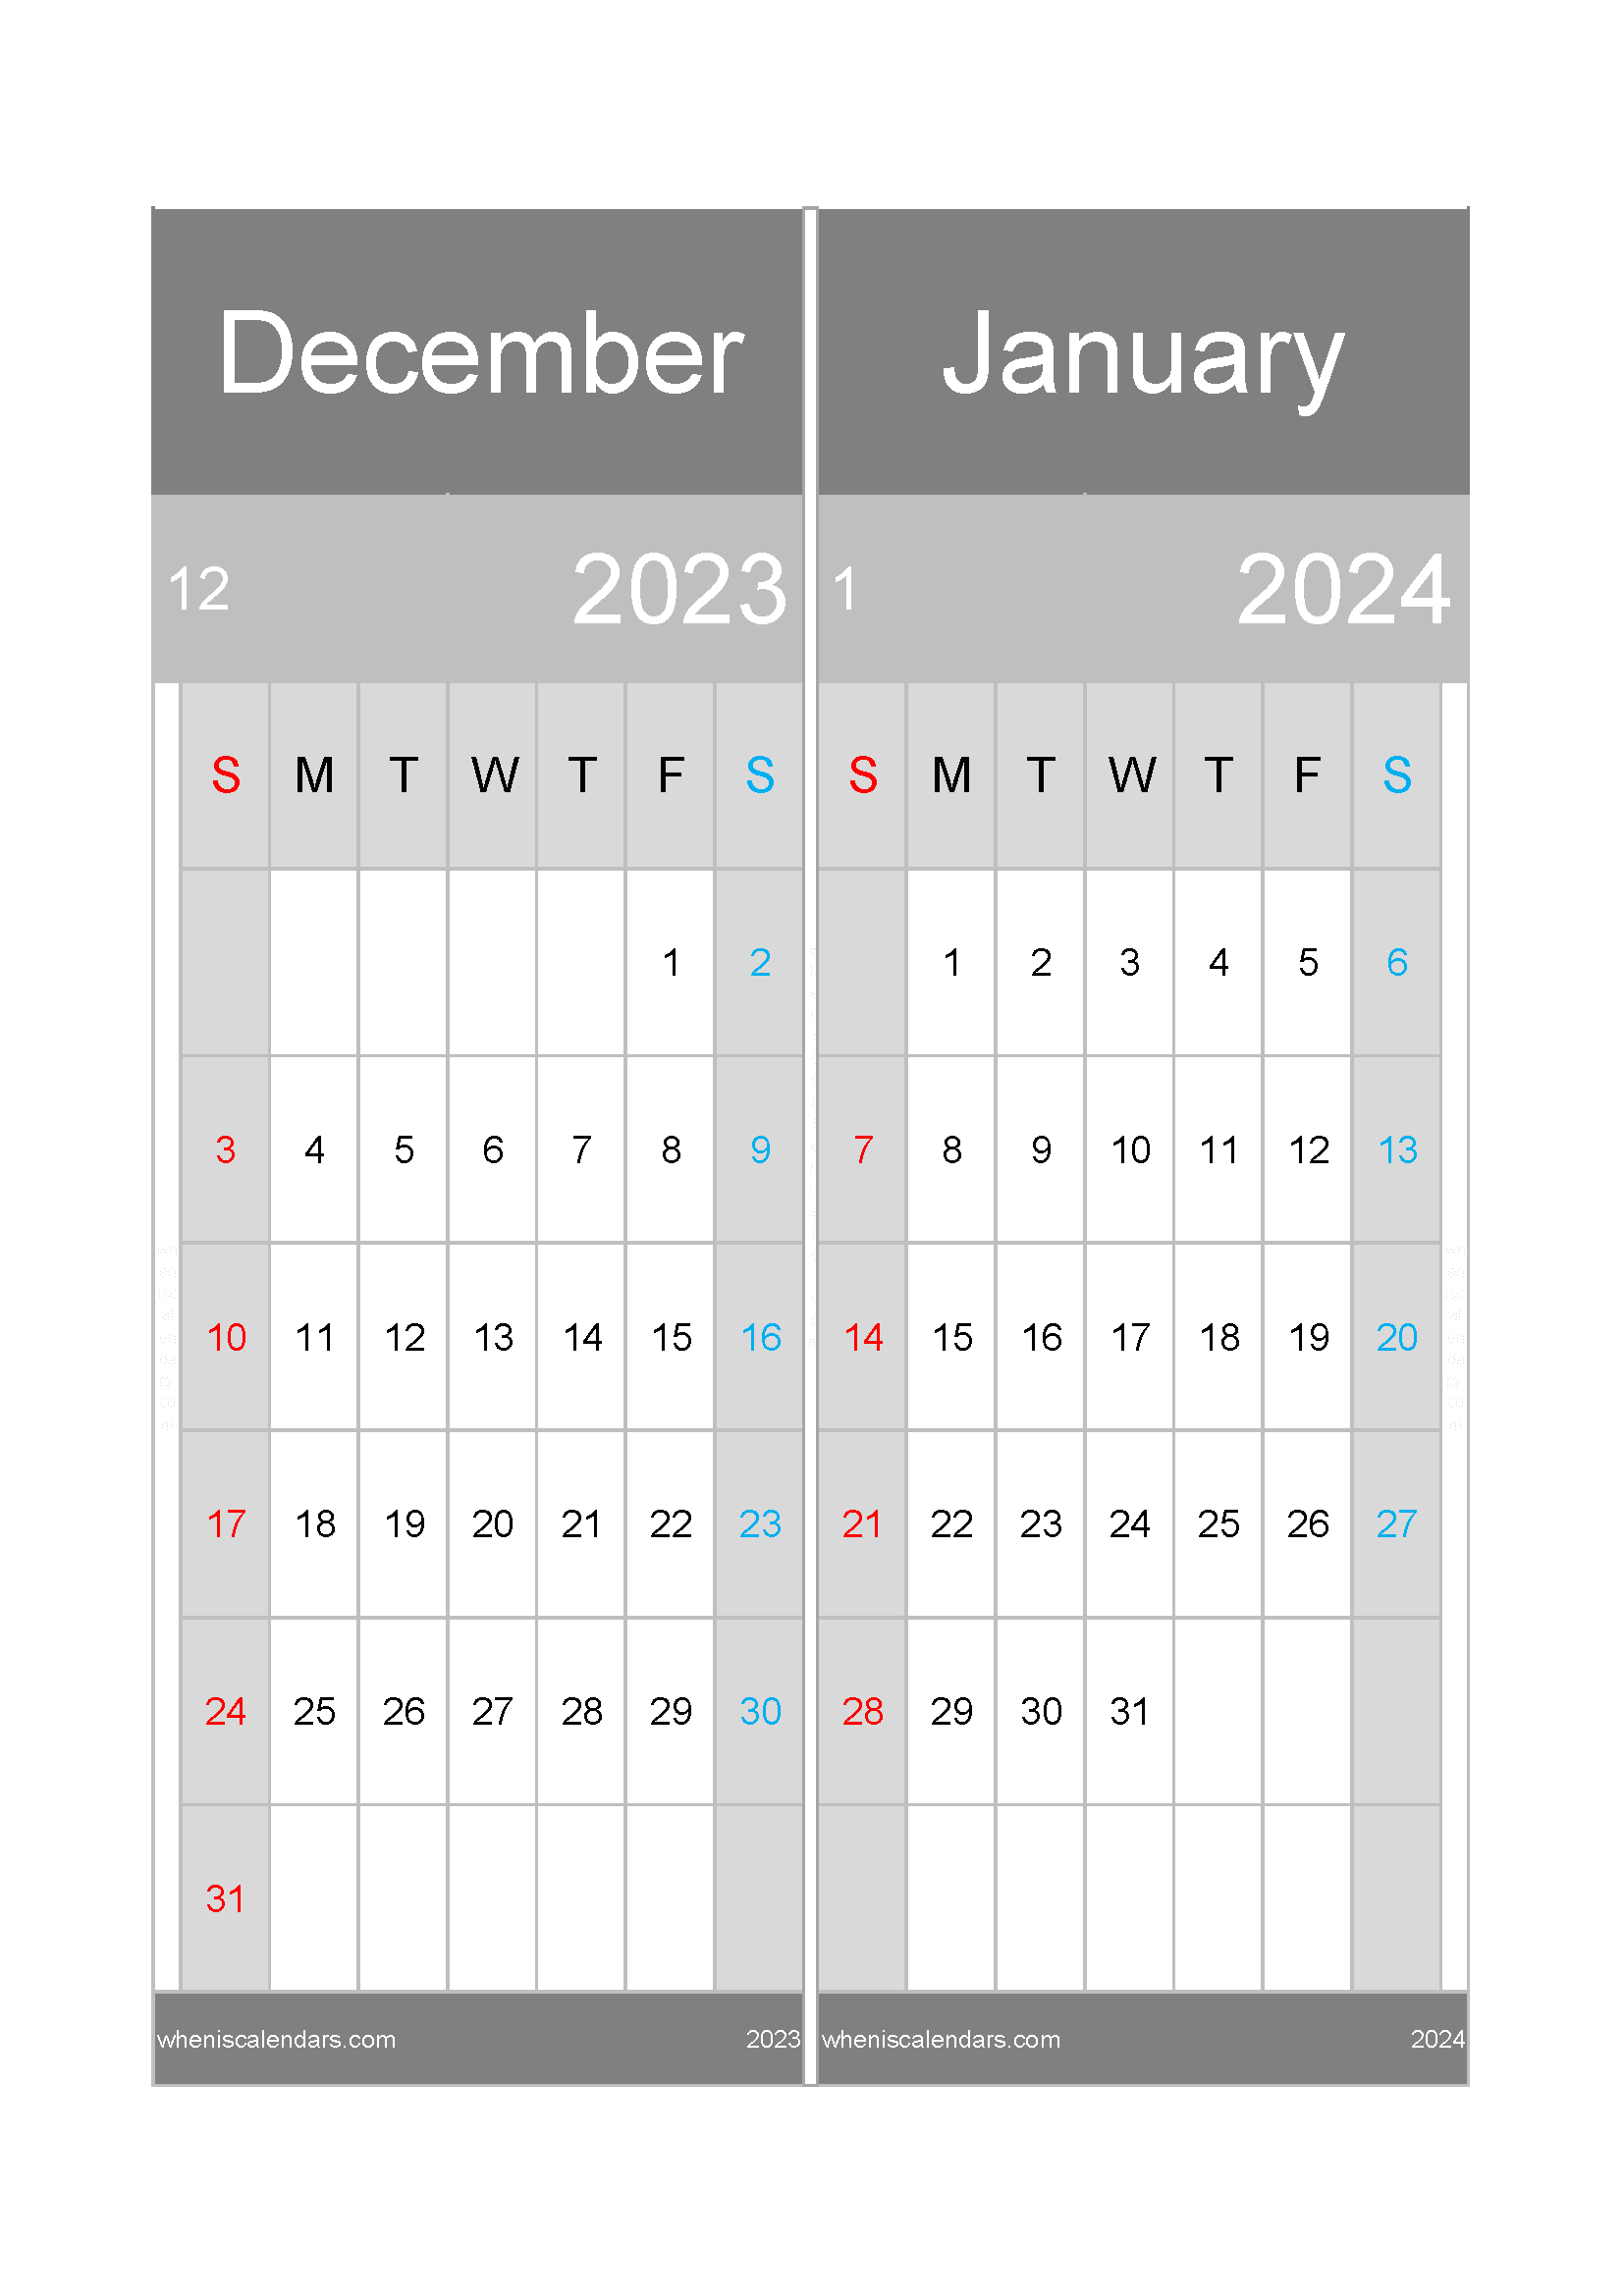 Download calendar for the month of December 2023 and January 2024 A4 DJ23047